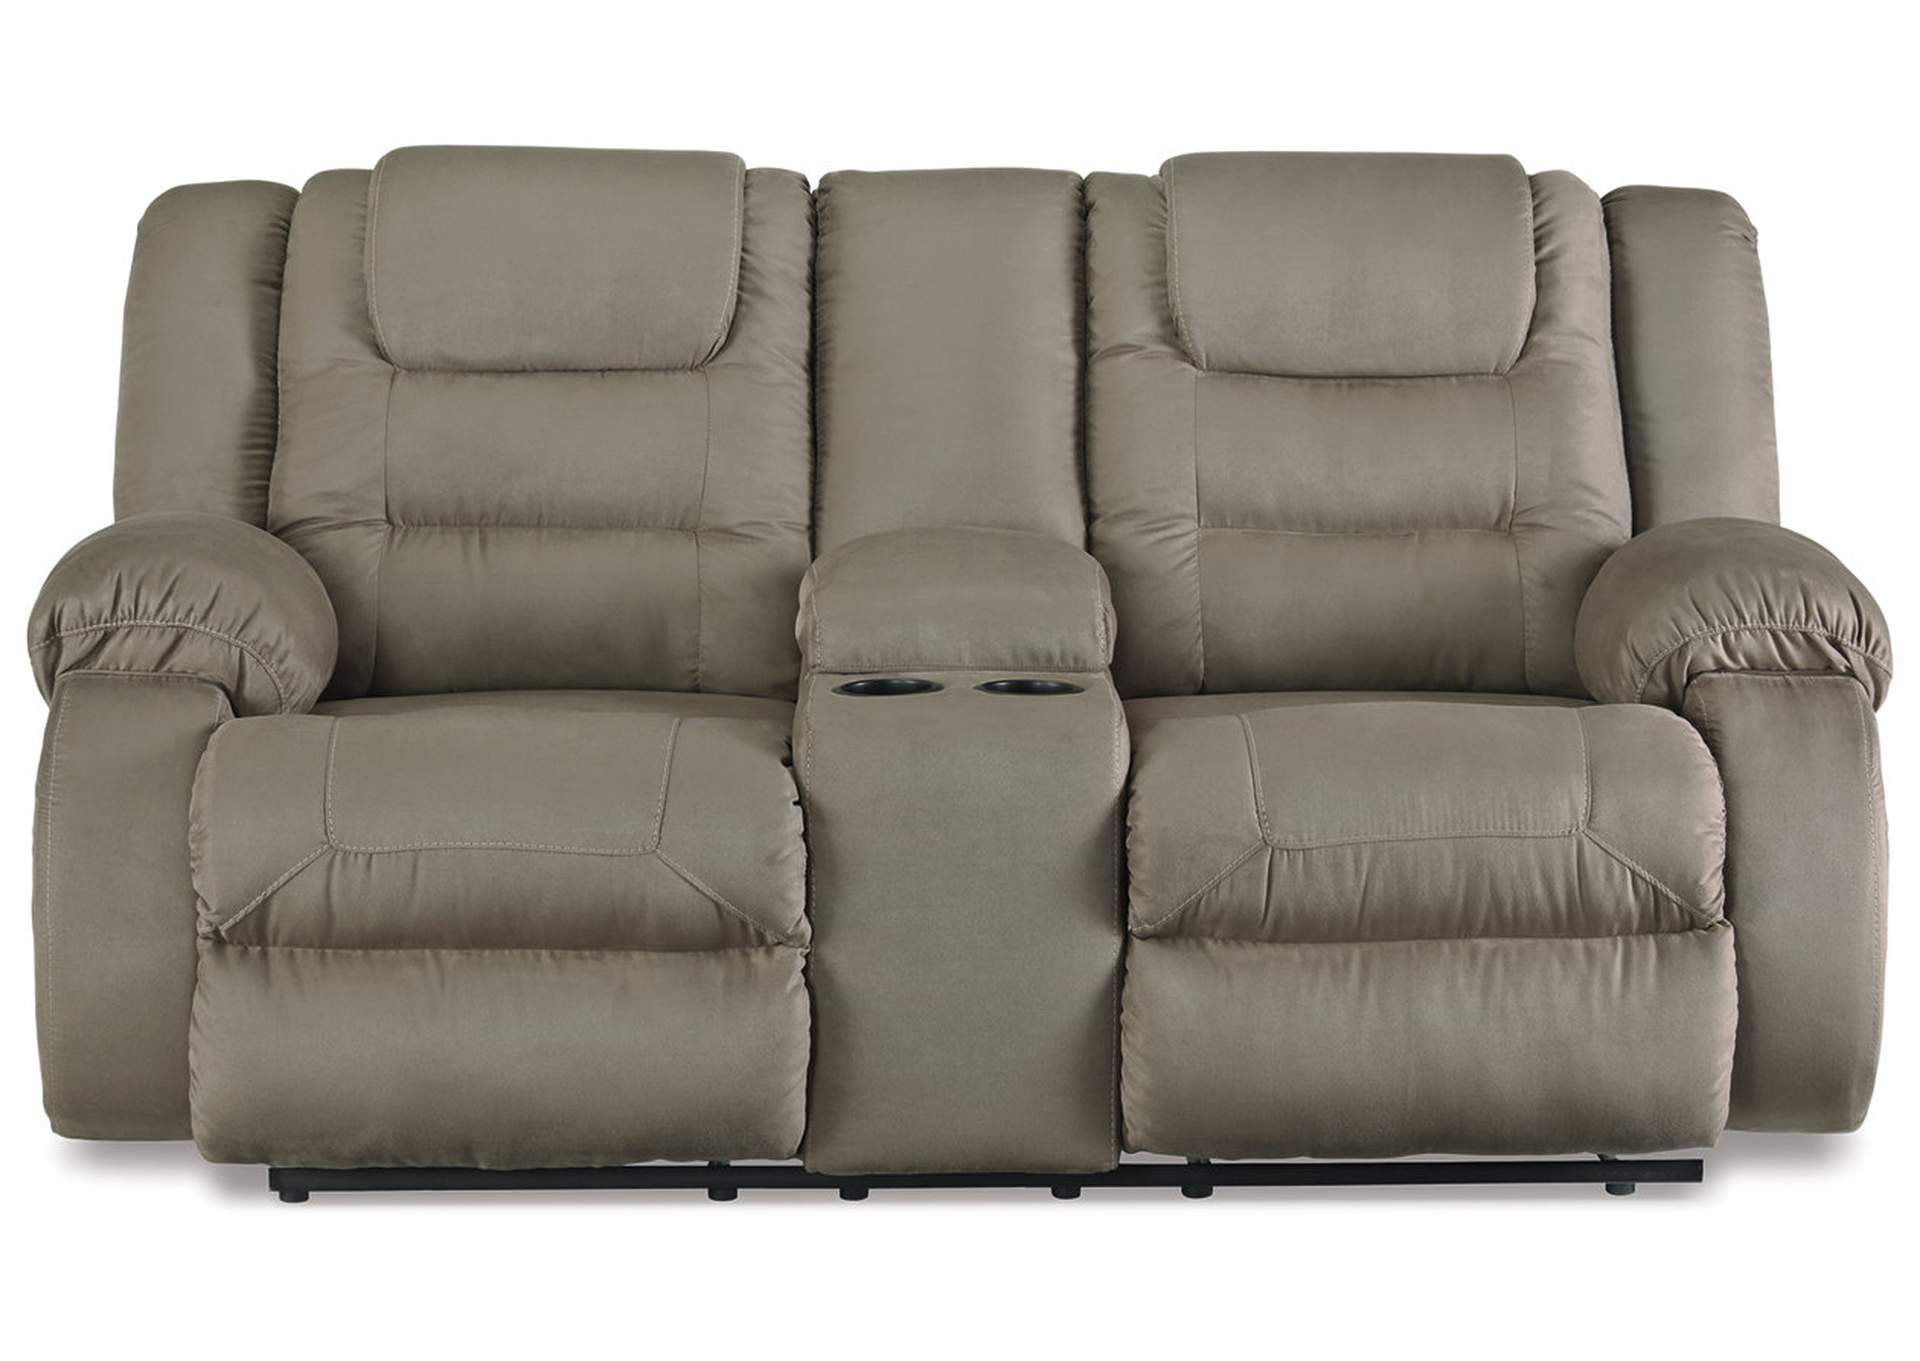 McCade Reclining Sofa, Loveseat and Recliner,Signature Design By Ashley